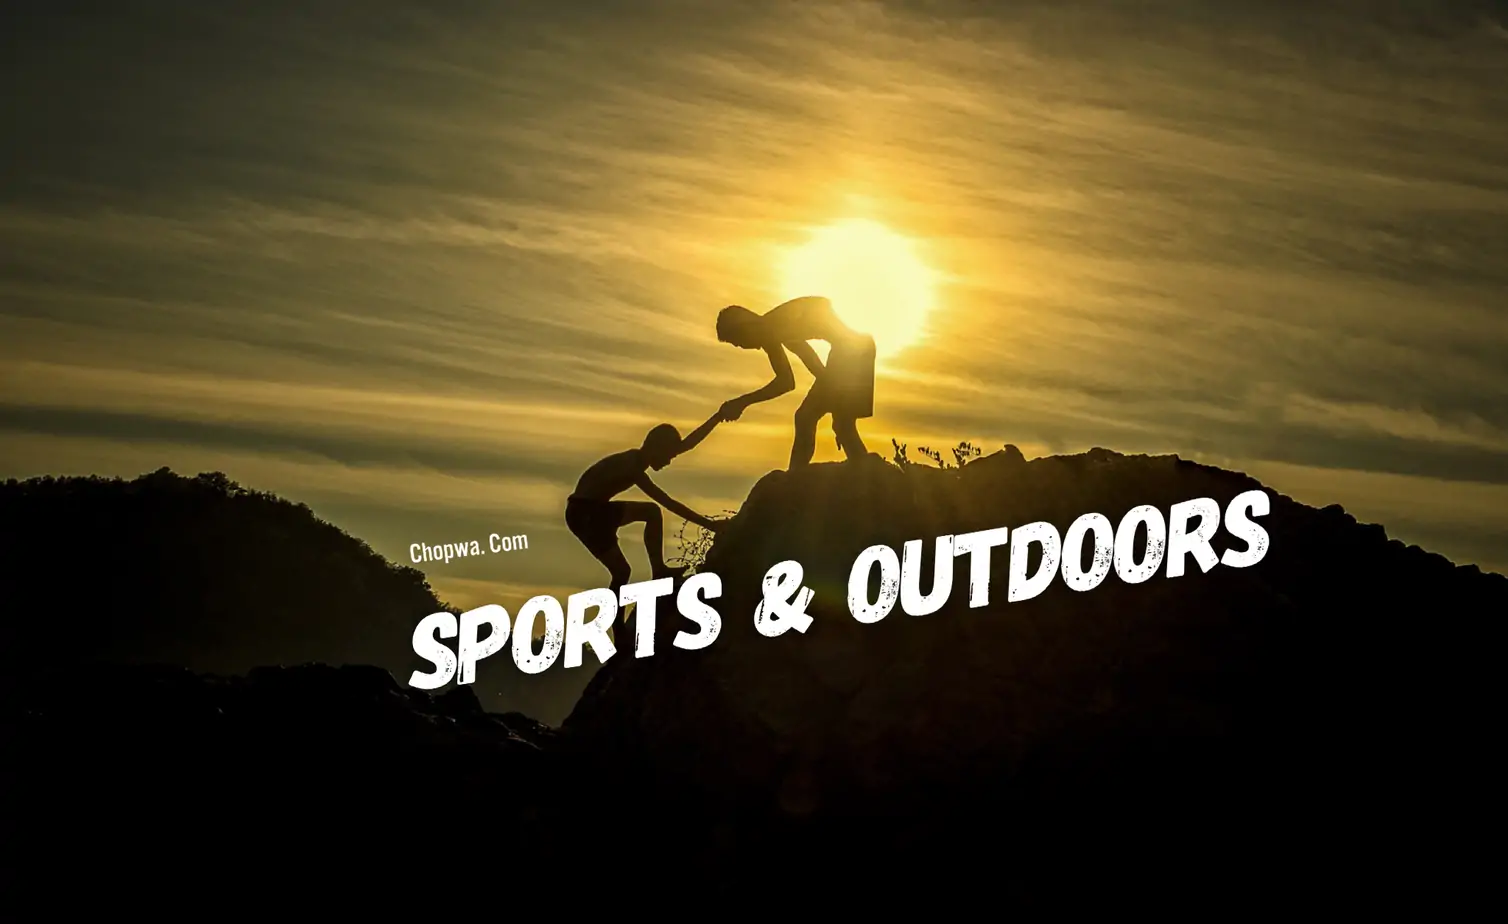 Sports and outdoors. On your marks! Go! Time to build up some condition and rake some fresn air